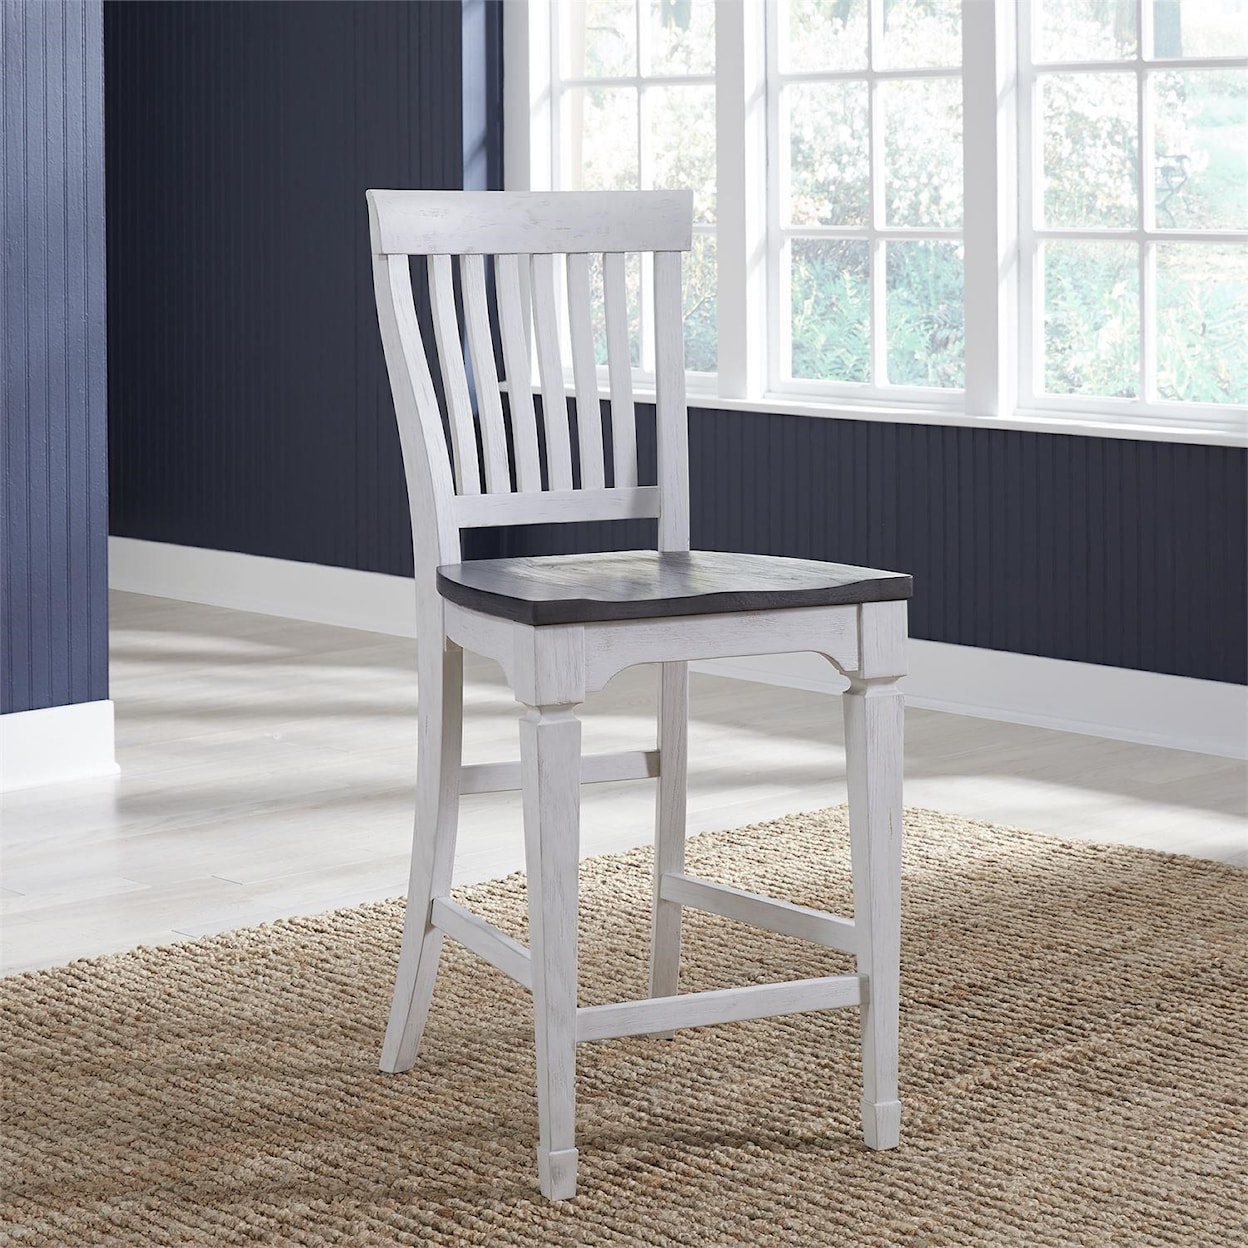 Liberty Furniture Allyson Park Counter-Height Chair